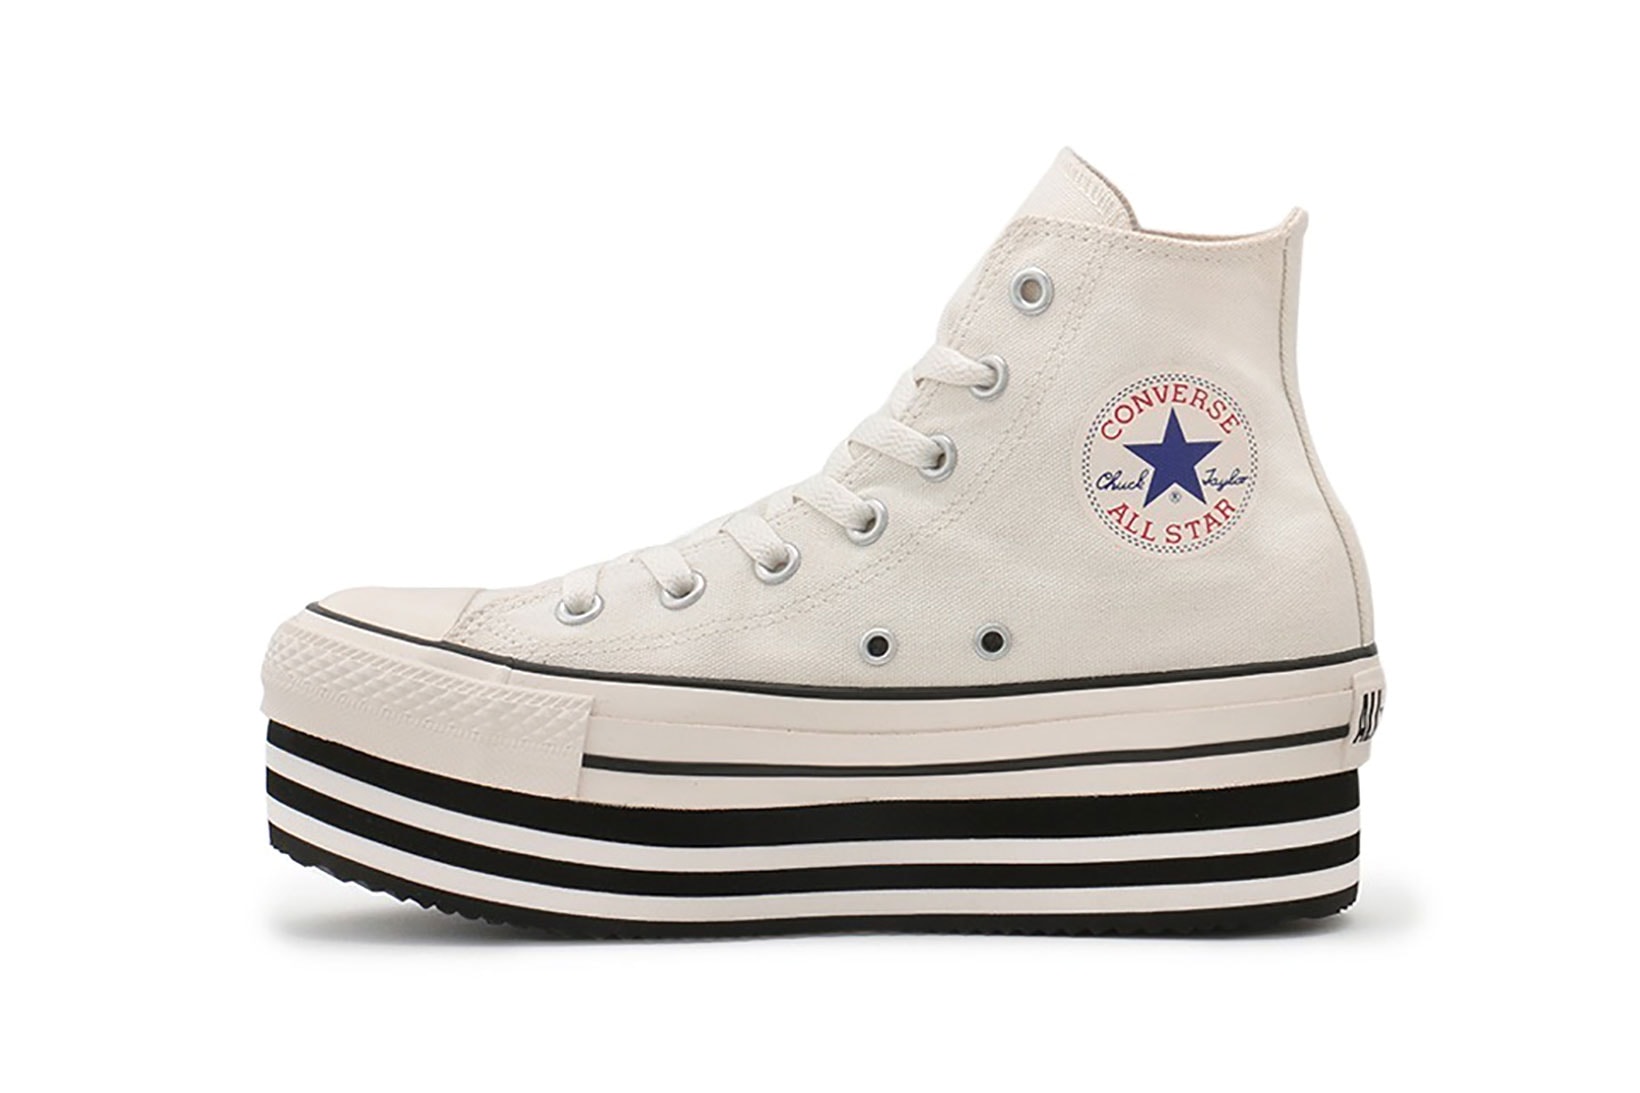 converse all star chunky line hi chuck taylor womens sneakers white black shoes footwear sneakerhead